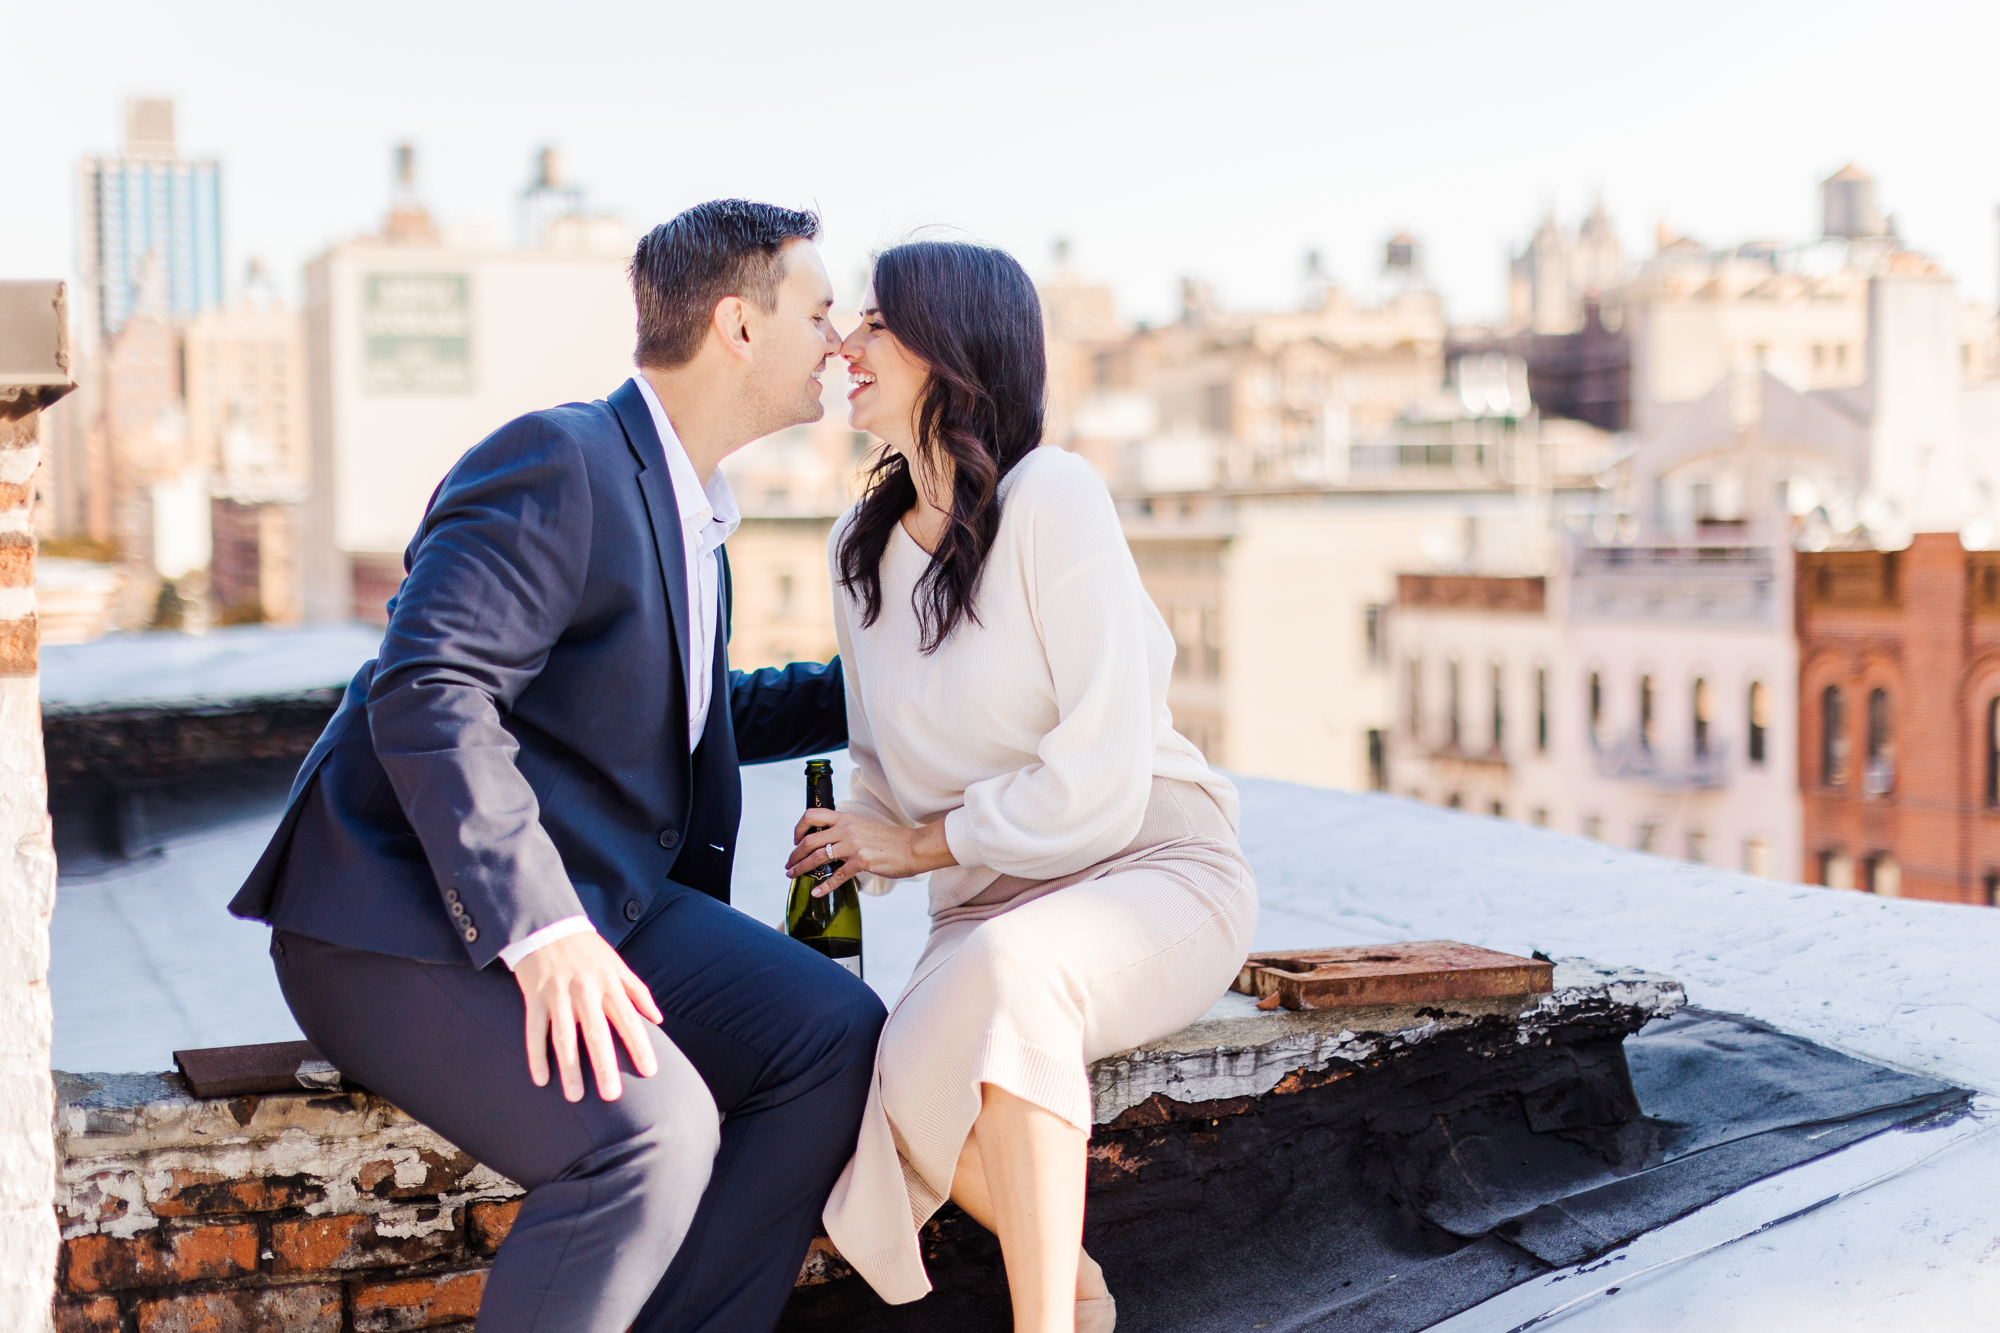 Cute Upper West Side Engagement Photo Shoot in NYC